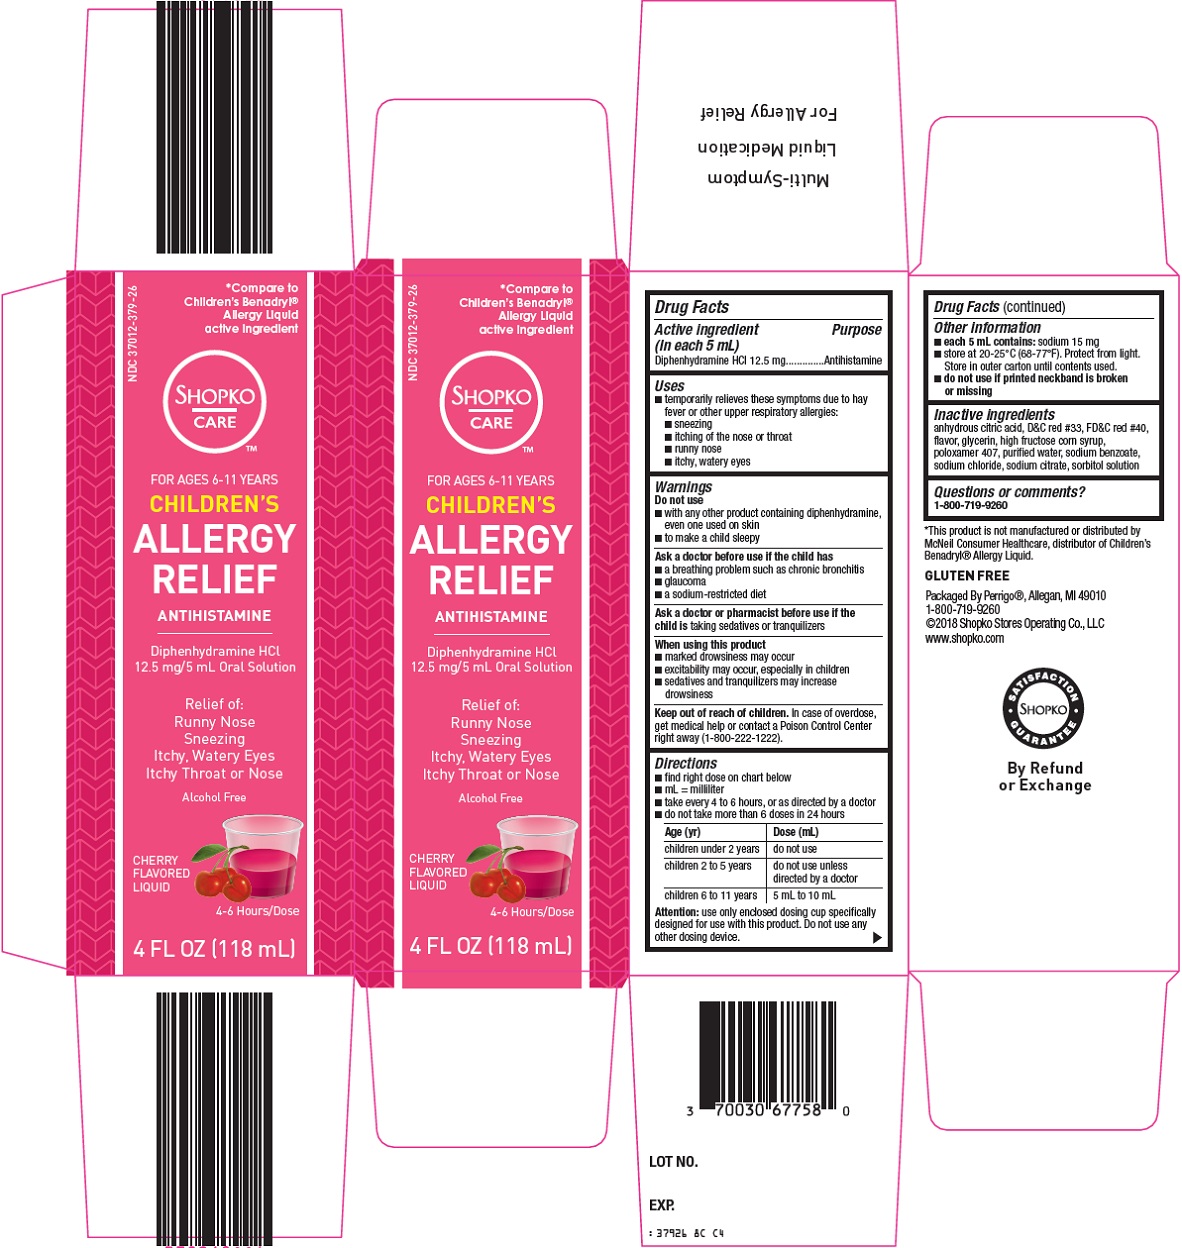 childrens-allergy-relief-image